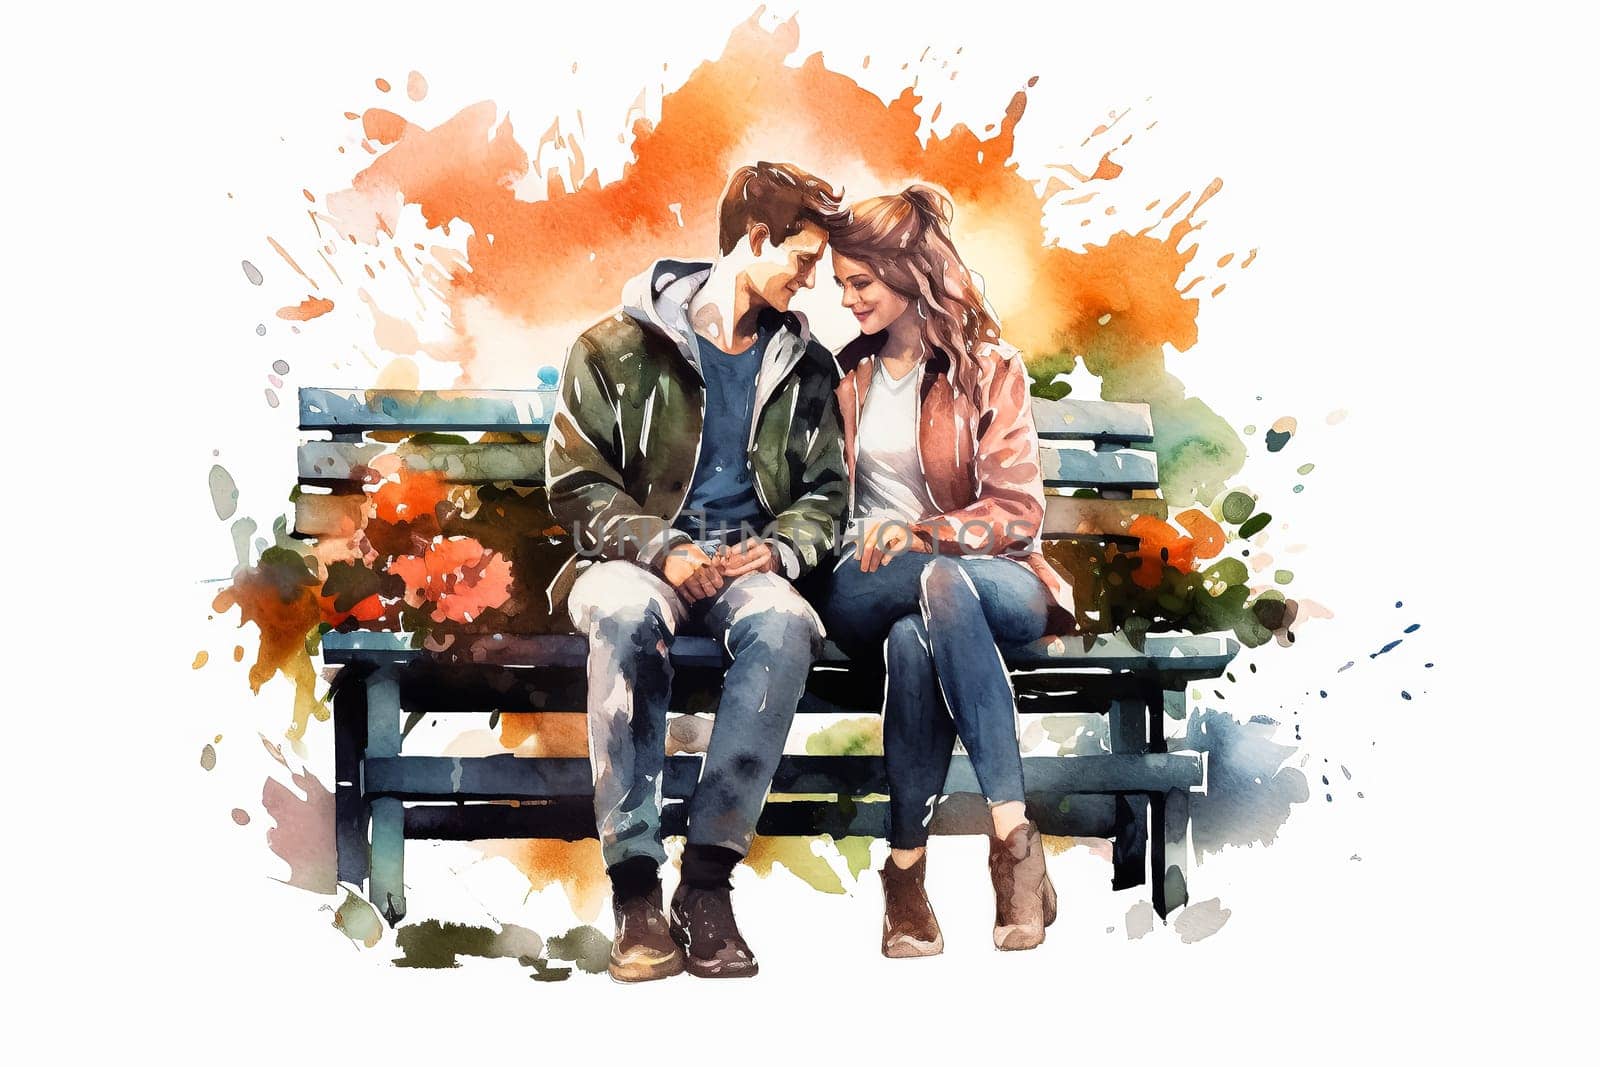 a watercolor illustration capturing a couple in a tender moment, sitting on a bench. by Alla_Morozova93